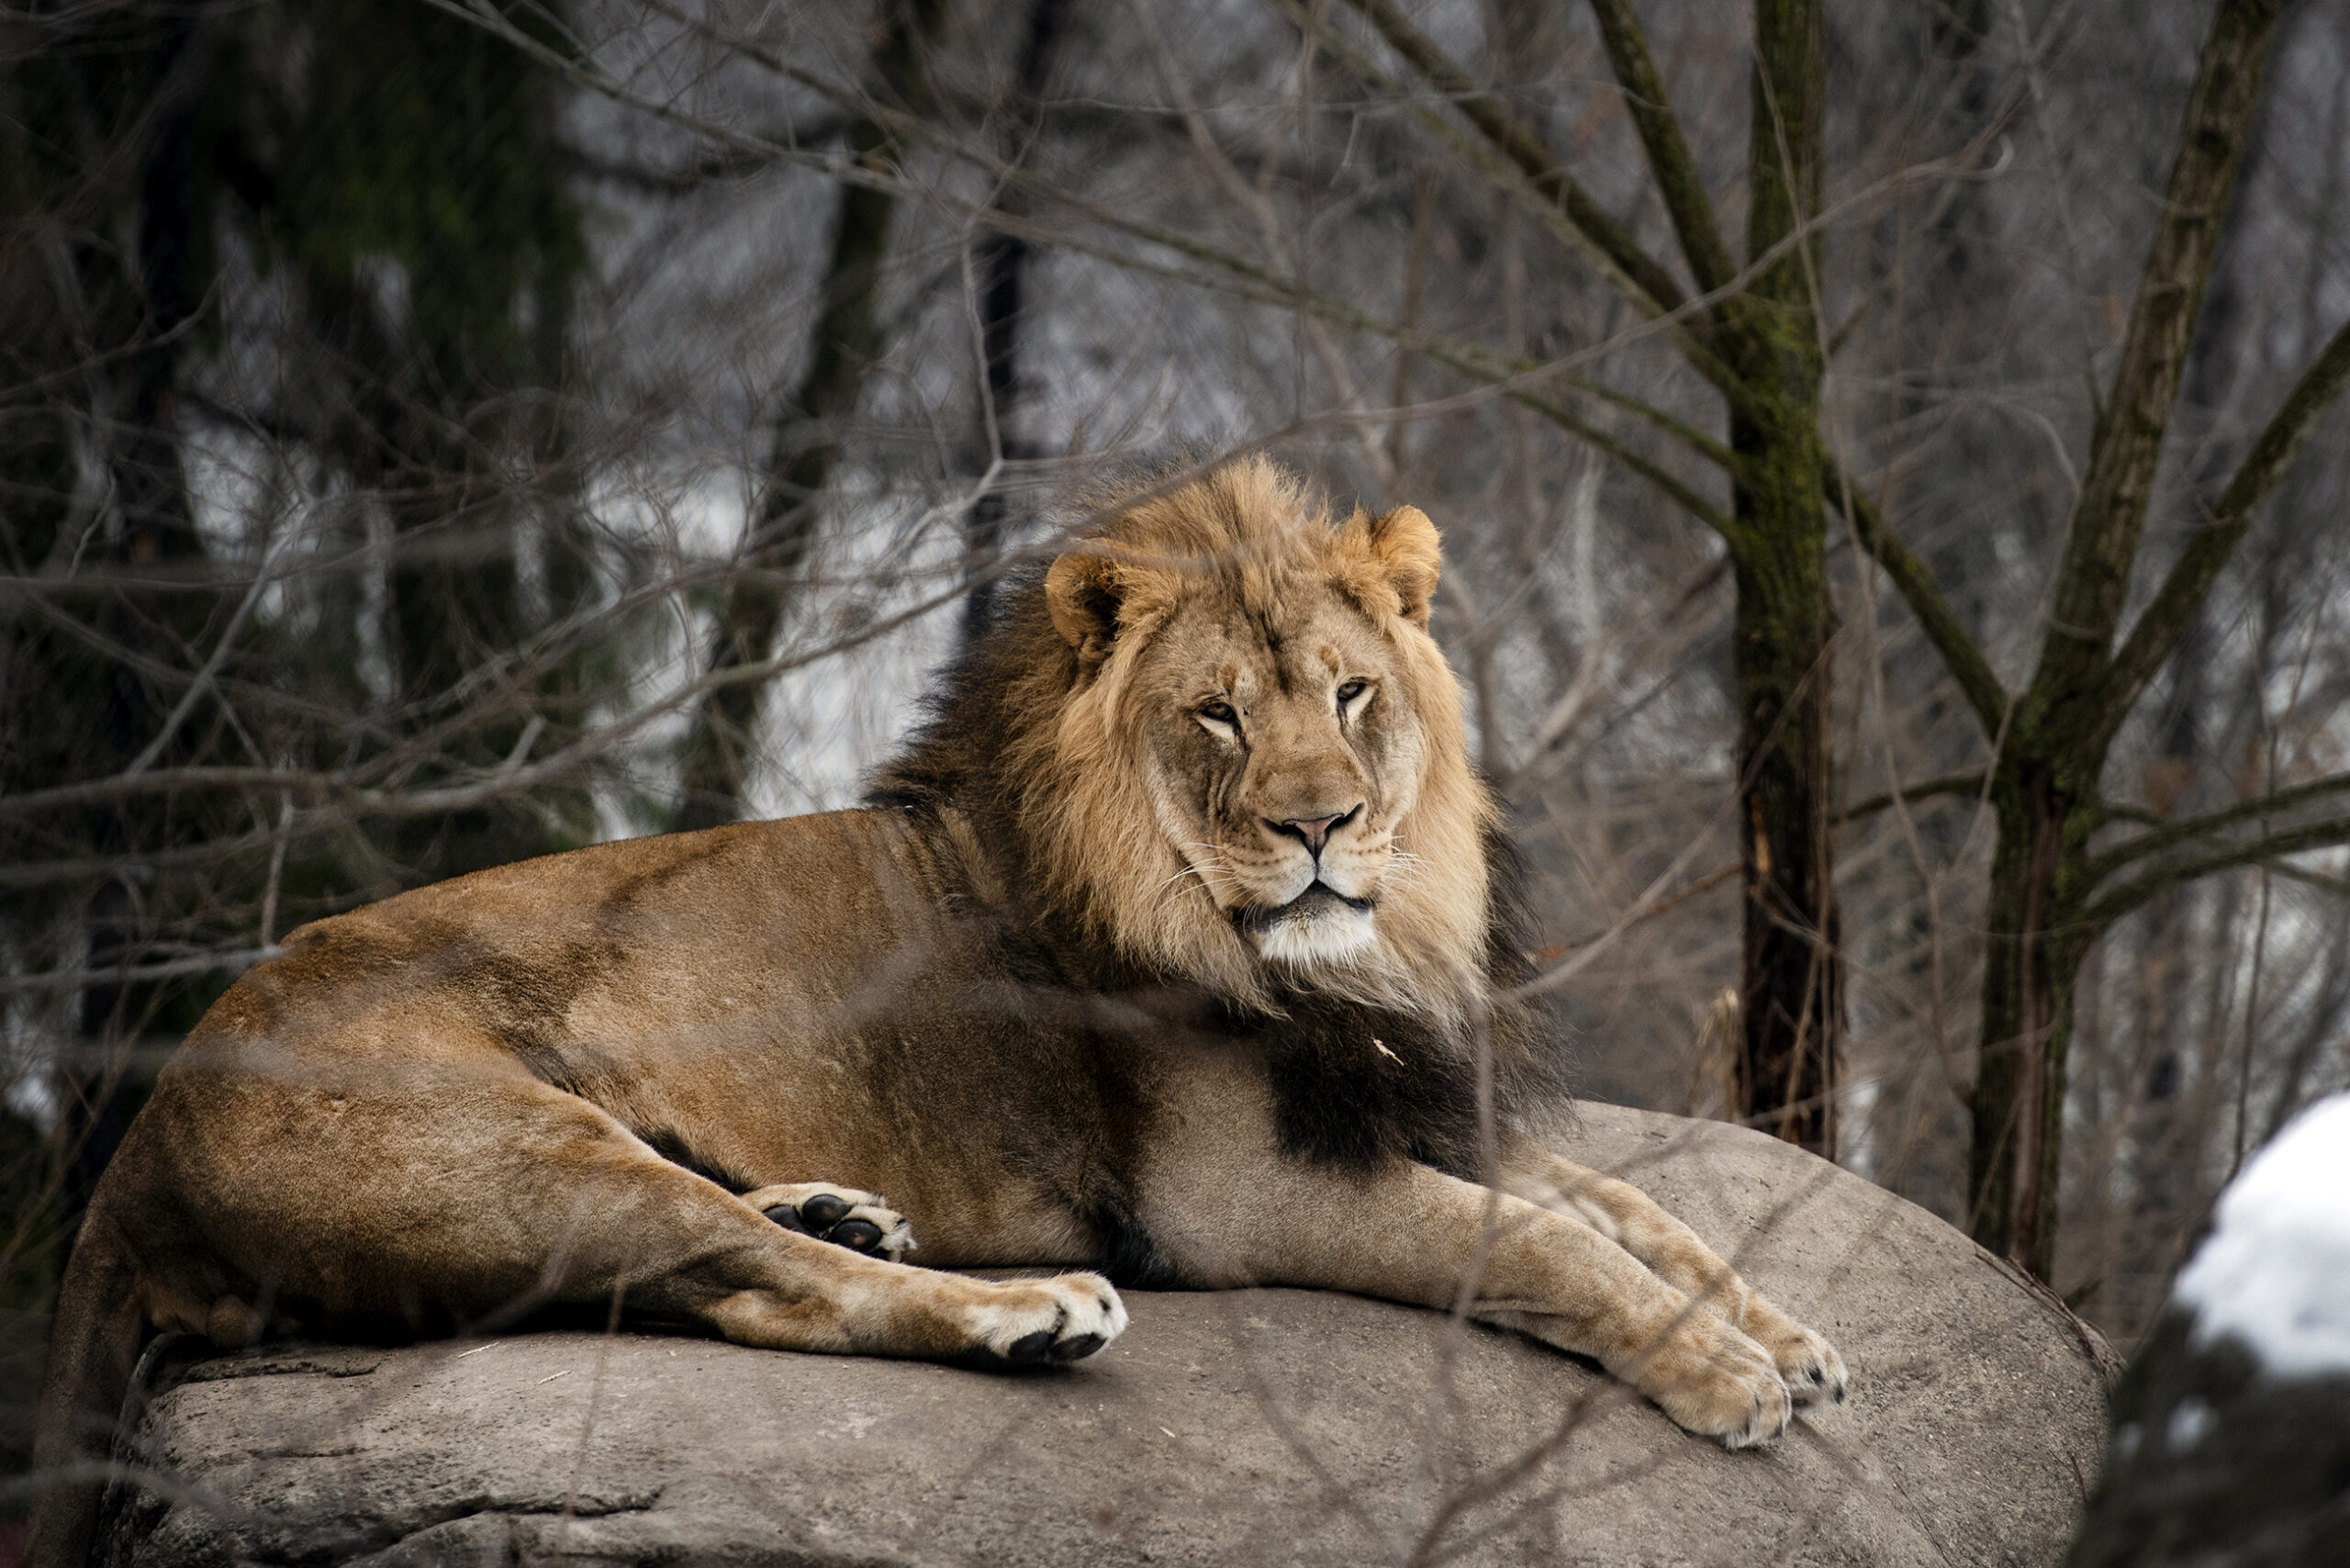 A lion with a mane rests on a rock in an outdoor habitat